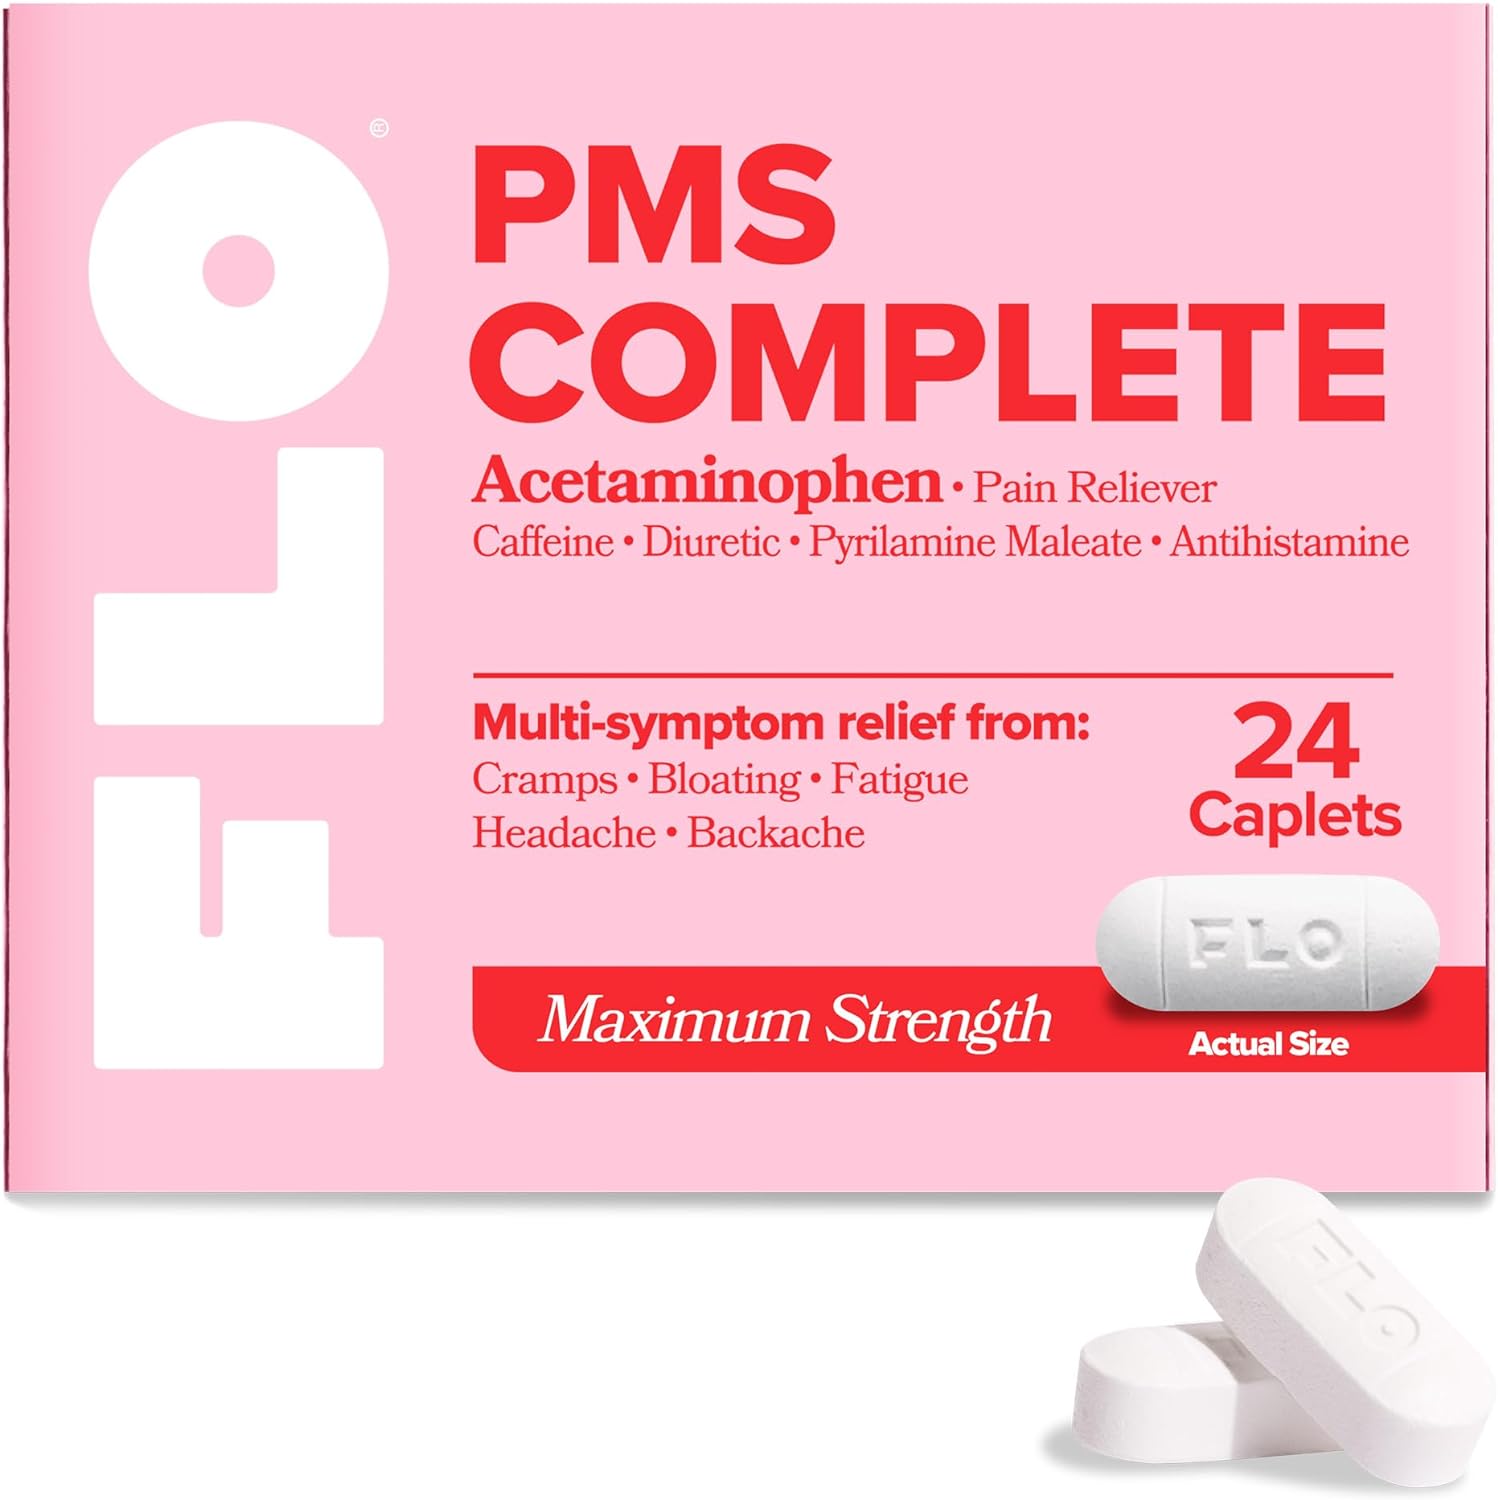 FLO PMS Complete Tablets, Menstrual Pain Relief for Women, 24 Count (1 Pack) - Multi-Symptom Pain Reliever with Acetaminophen, Caffeine, & Pyrilamine Maleate for Cramps, Headaches, Backaches, Bloating